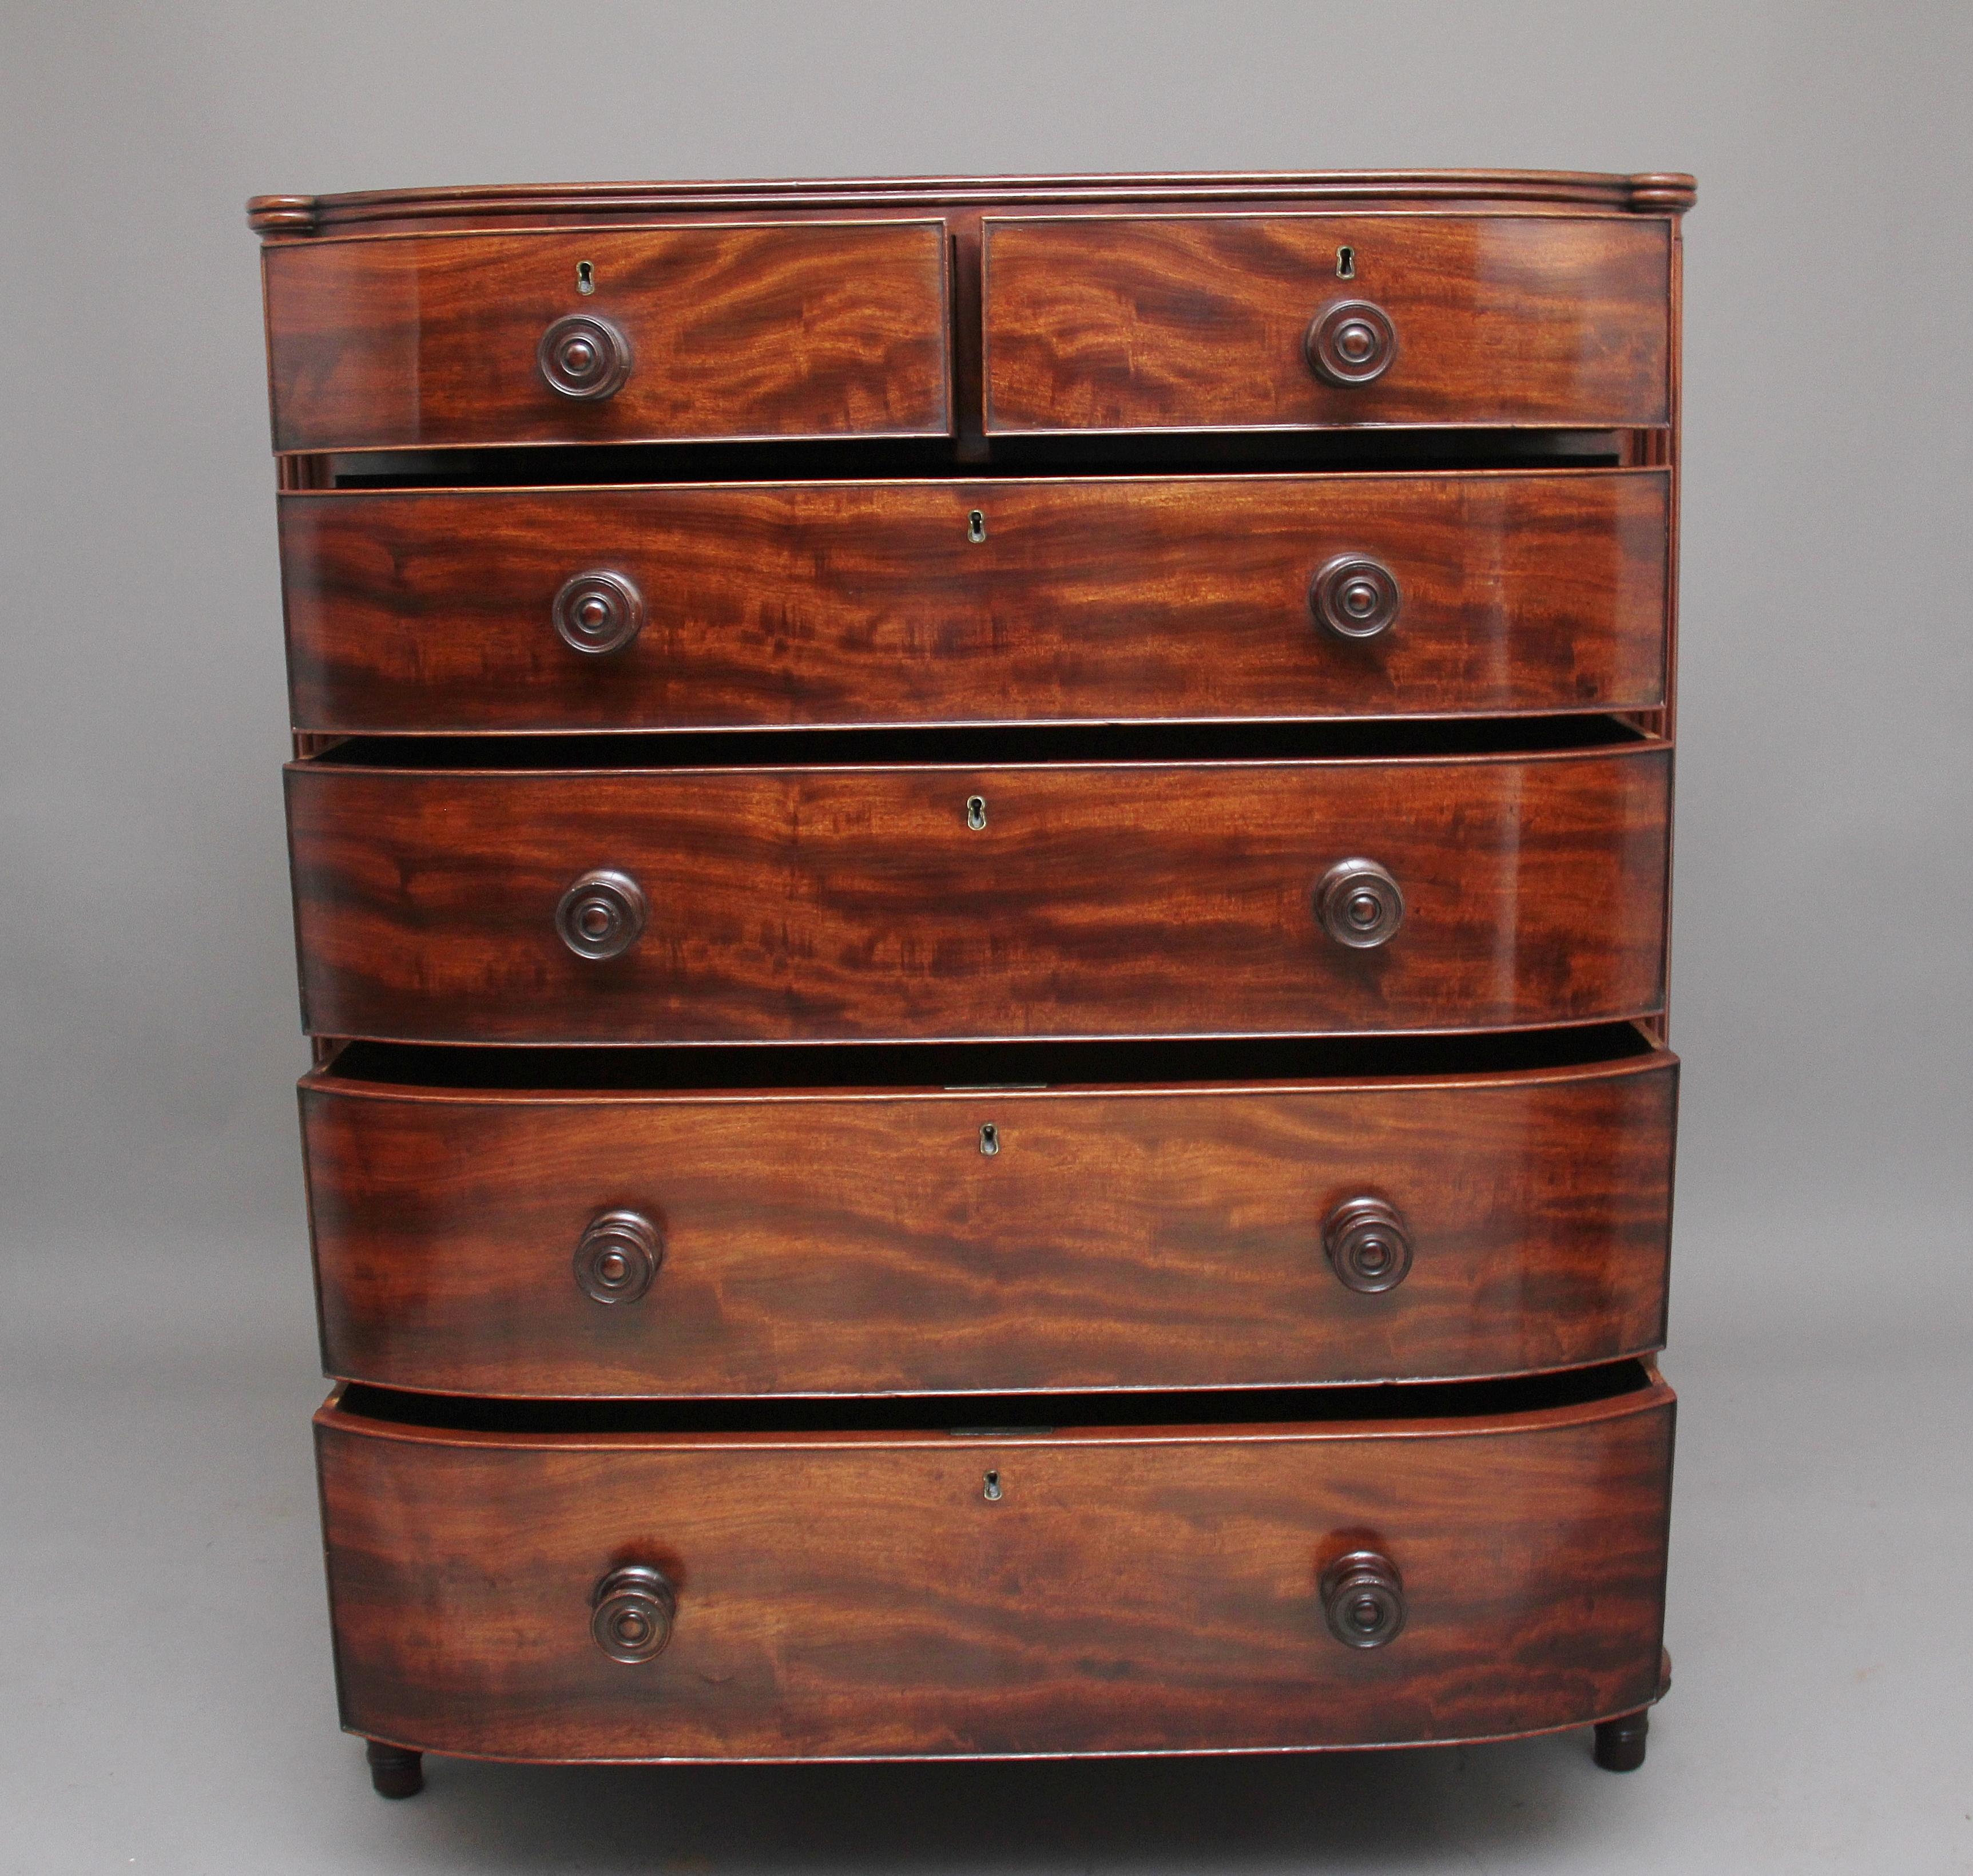 A superb quality early 19th century flame mahogany chest of drawers, having a lovely figured top above a selection of two short over four long graduated drawers, all oak lined and having original turned wooden handles, reeded pillars at each end,